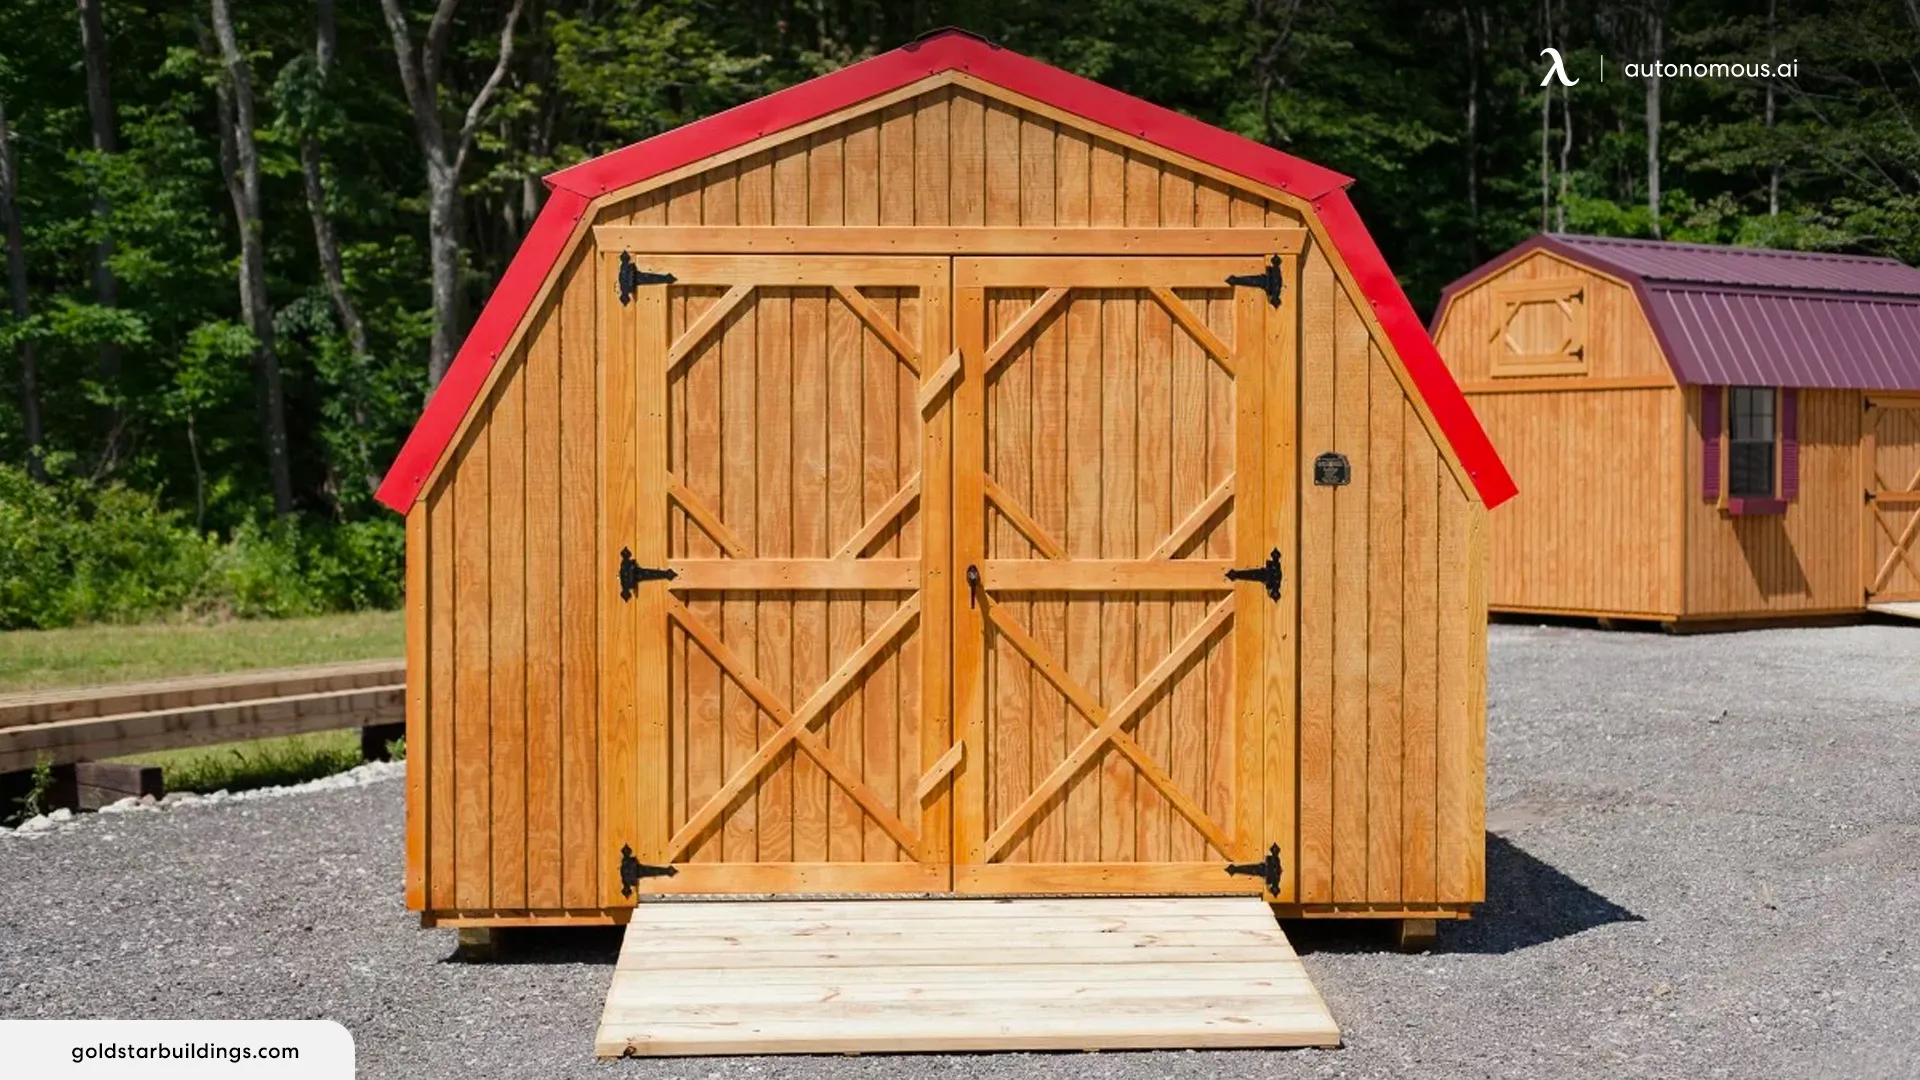 How to Find the Ideal Tiny House Parking Spot